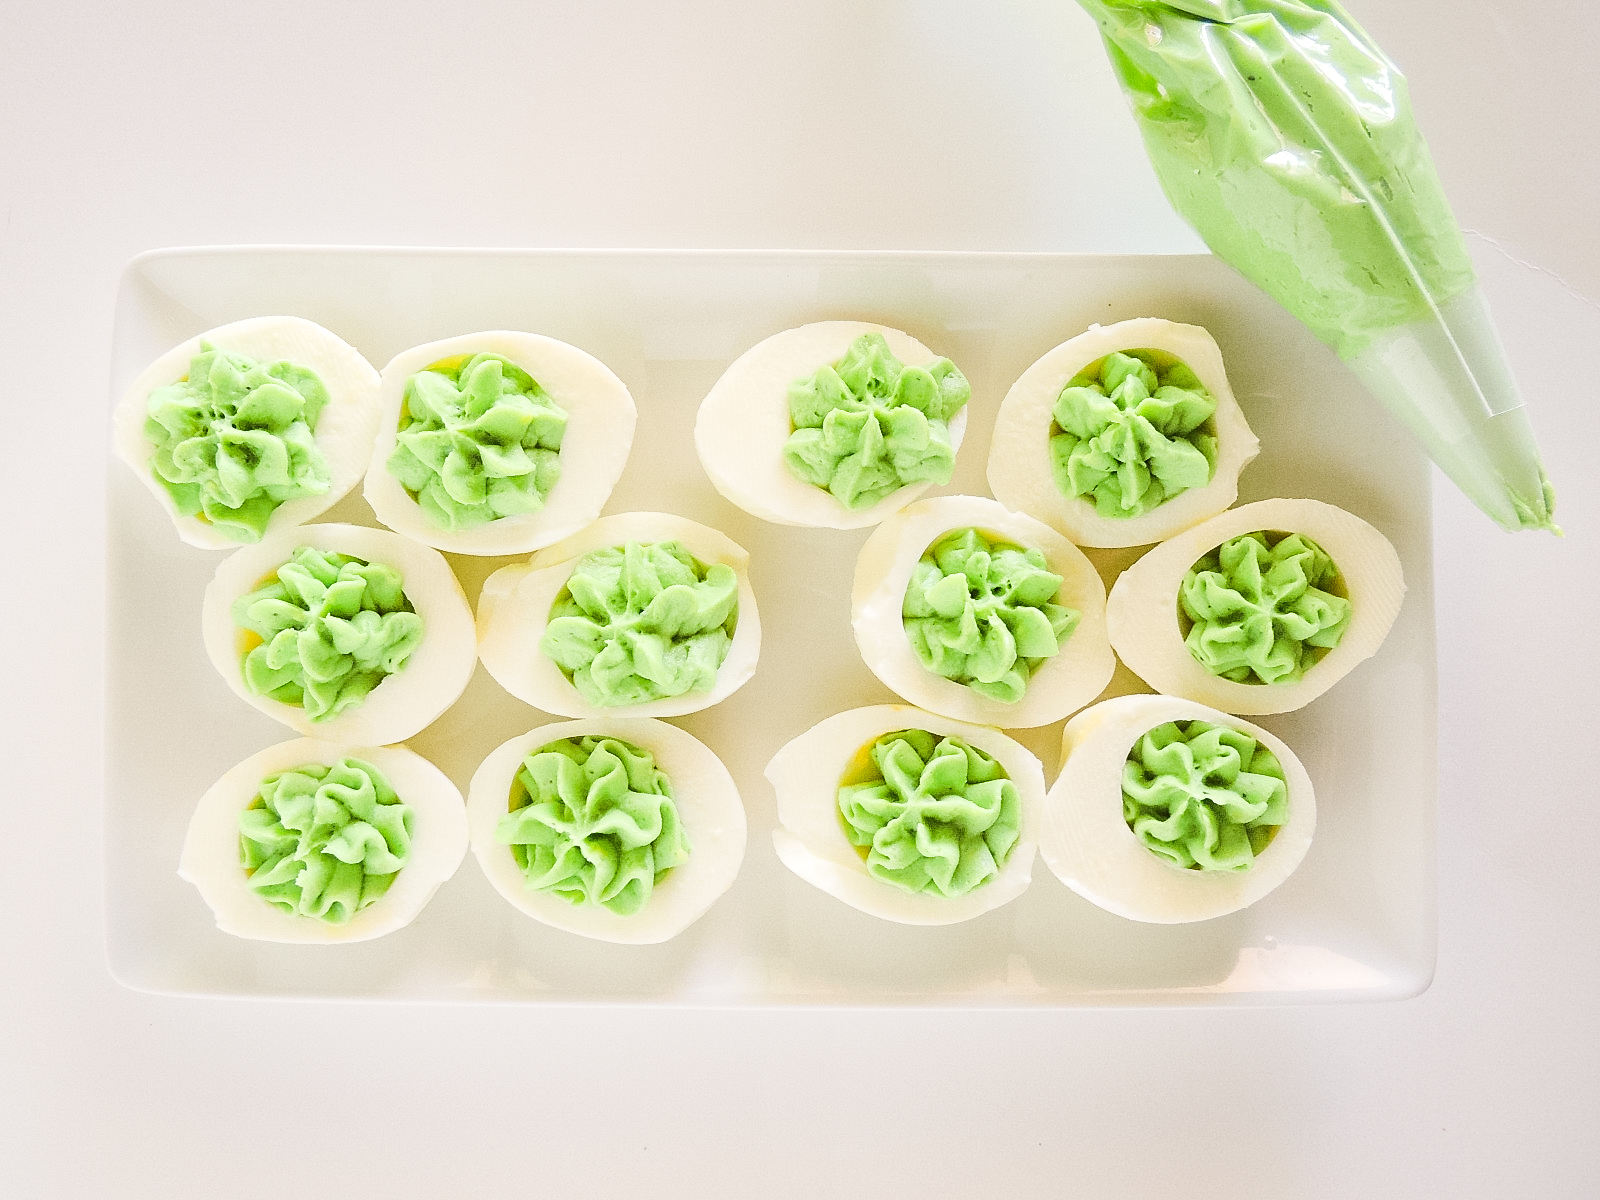 Hard boiled eggs with a green deviled egg filling. 